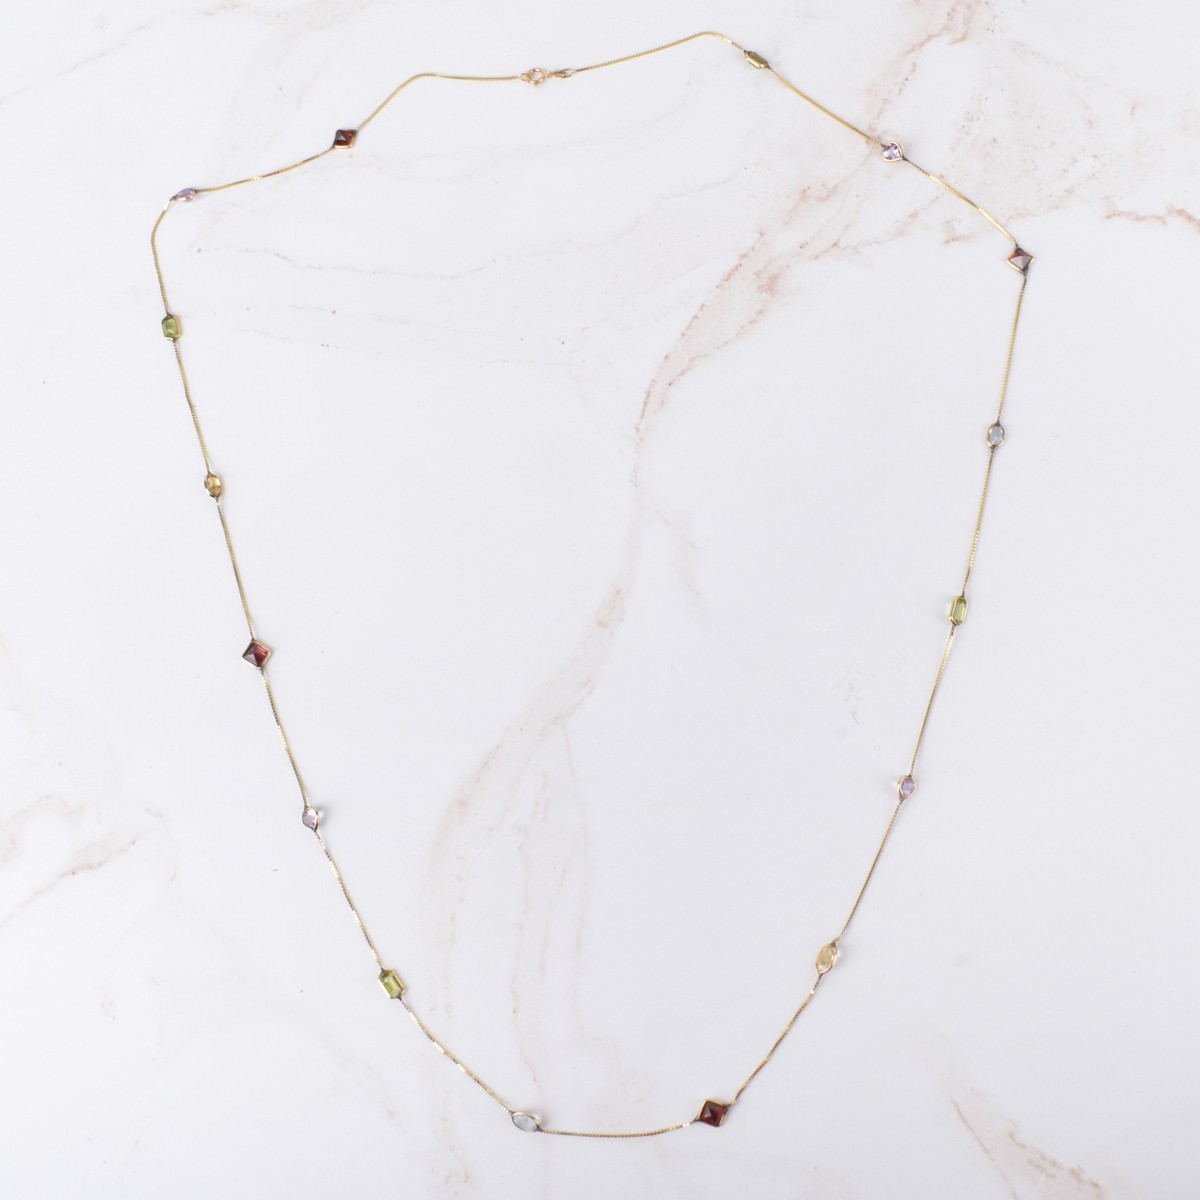 Gemstone and 14K Necklace